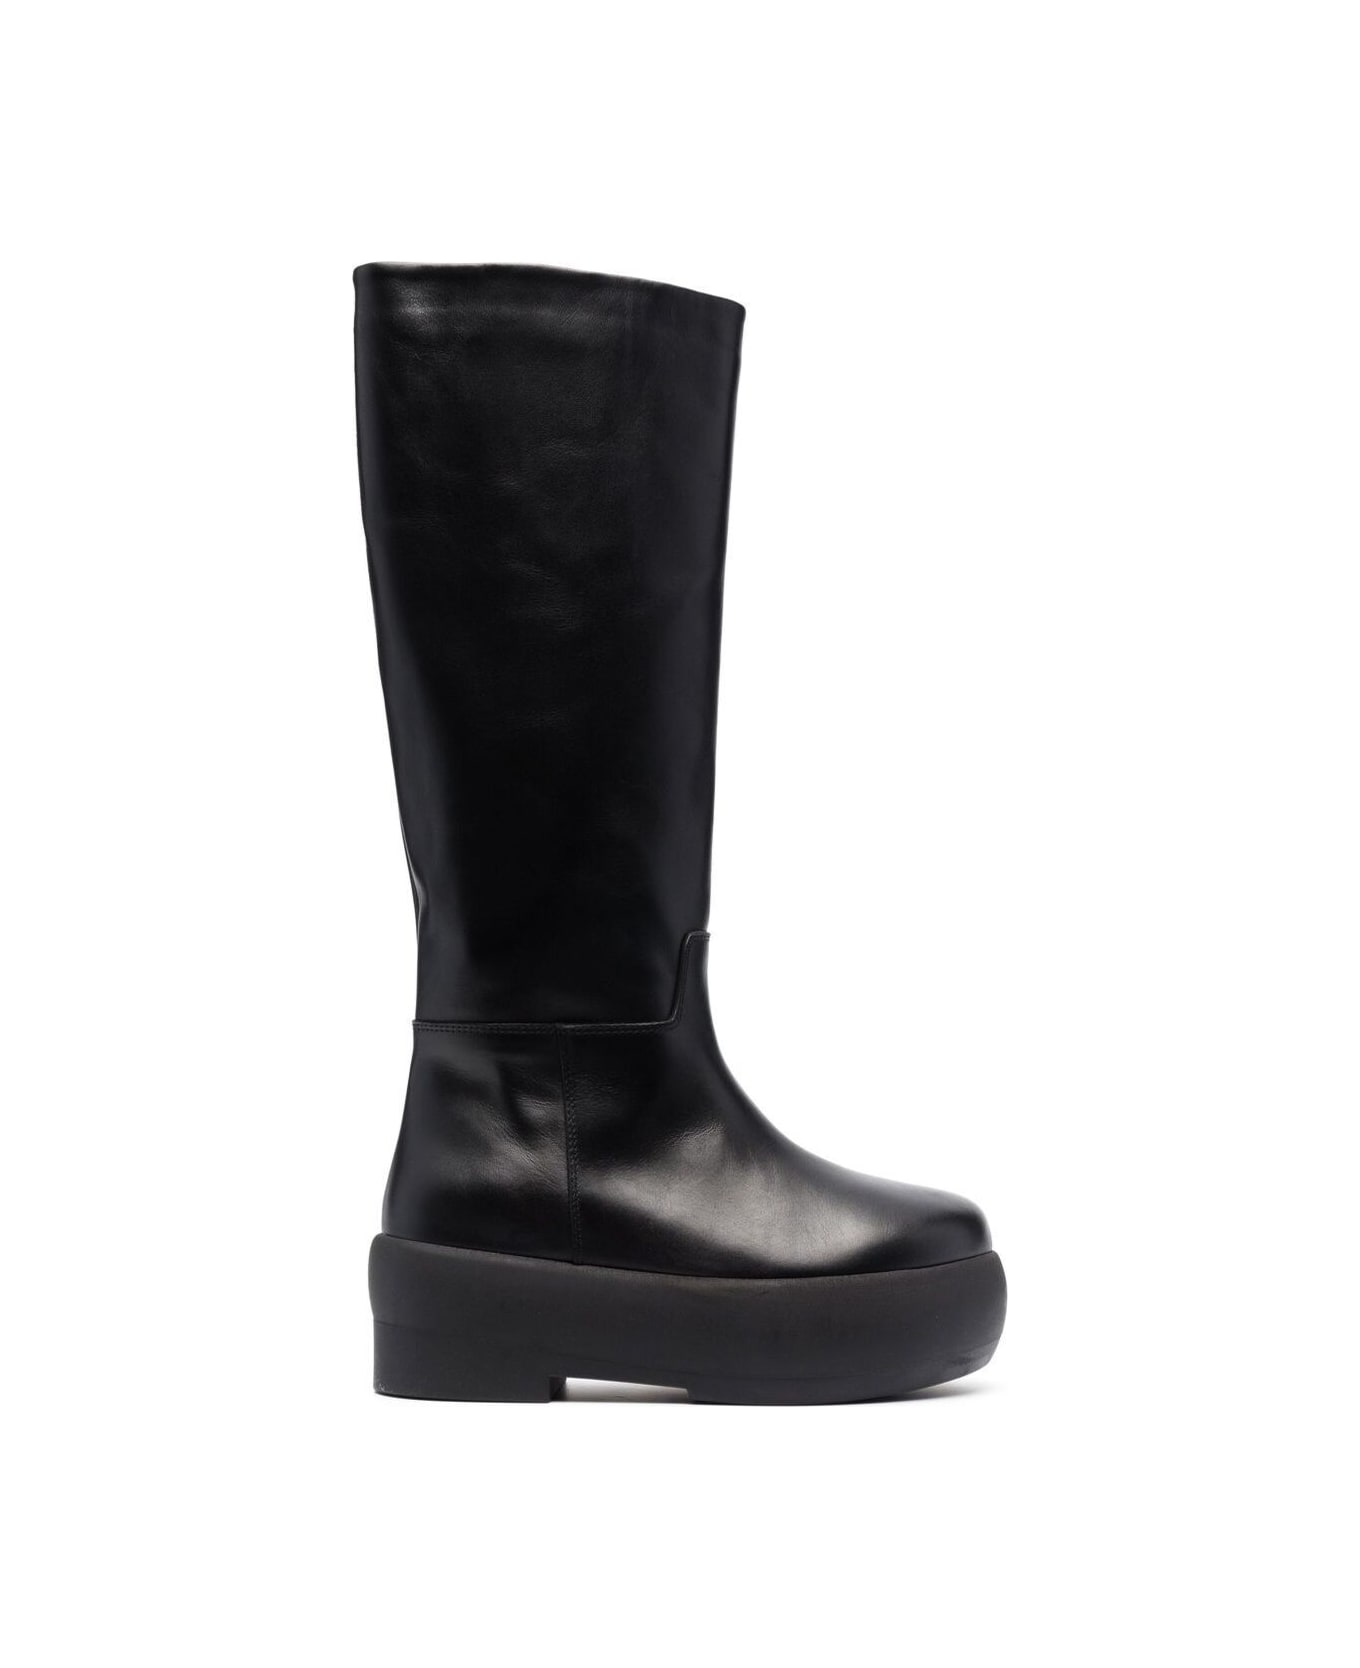 GIA BORGHINI Black Slip-on Boots With Platform In Smooth Leather Woman - Black ブーツ